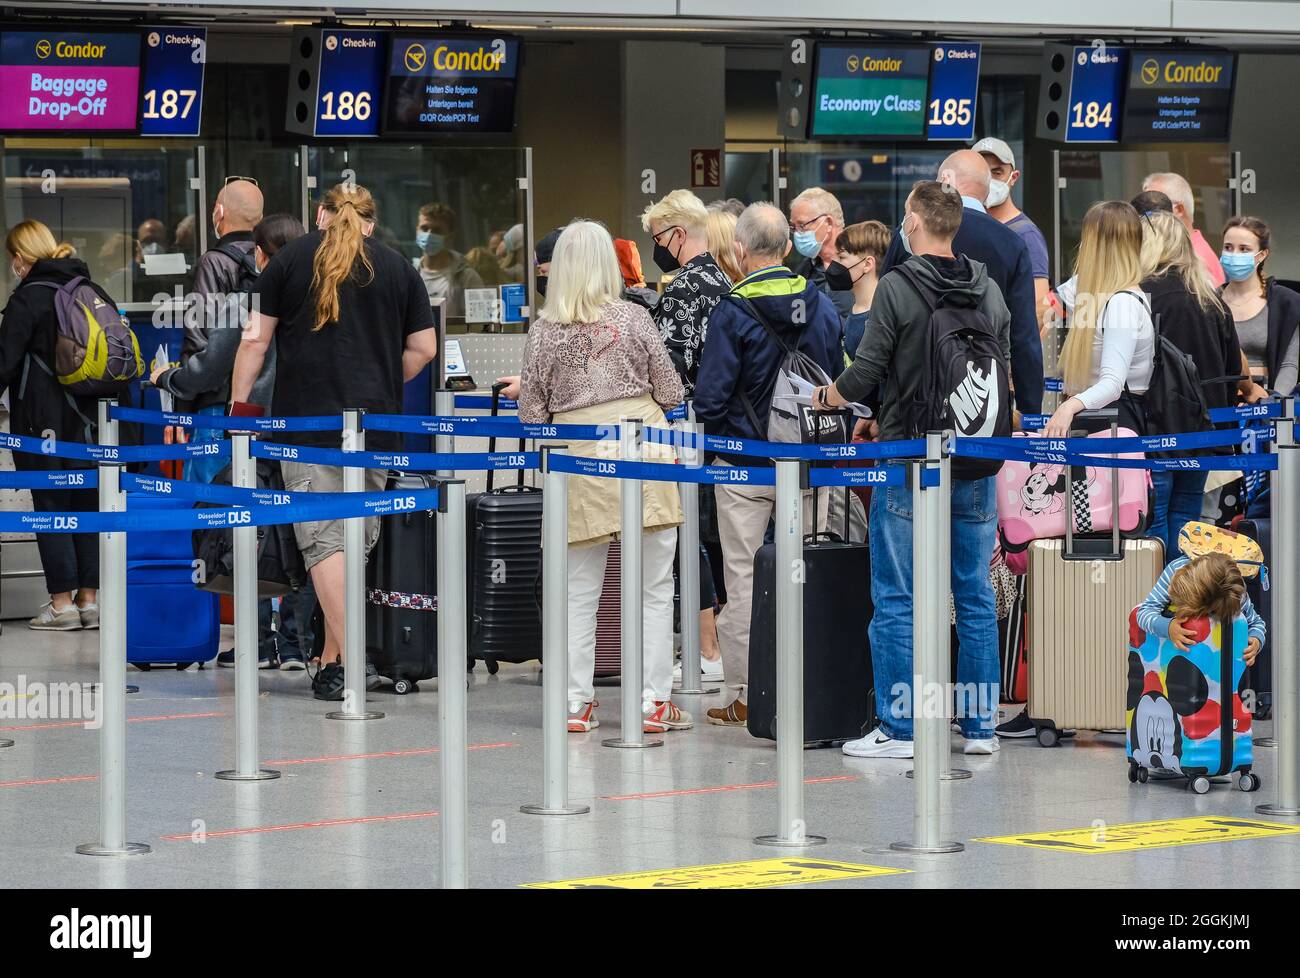 Duesseldorf, North Rhine-Westphalia, Germany - Duesseldorf Airport, holiday  start in NRW, vacationers stand in line with suitcases at the Condor  check-in counter in times of the corona pandemic on their way to